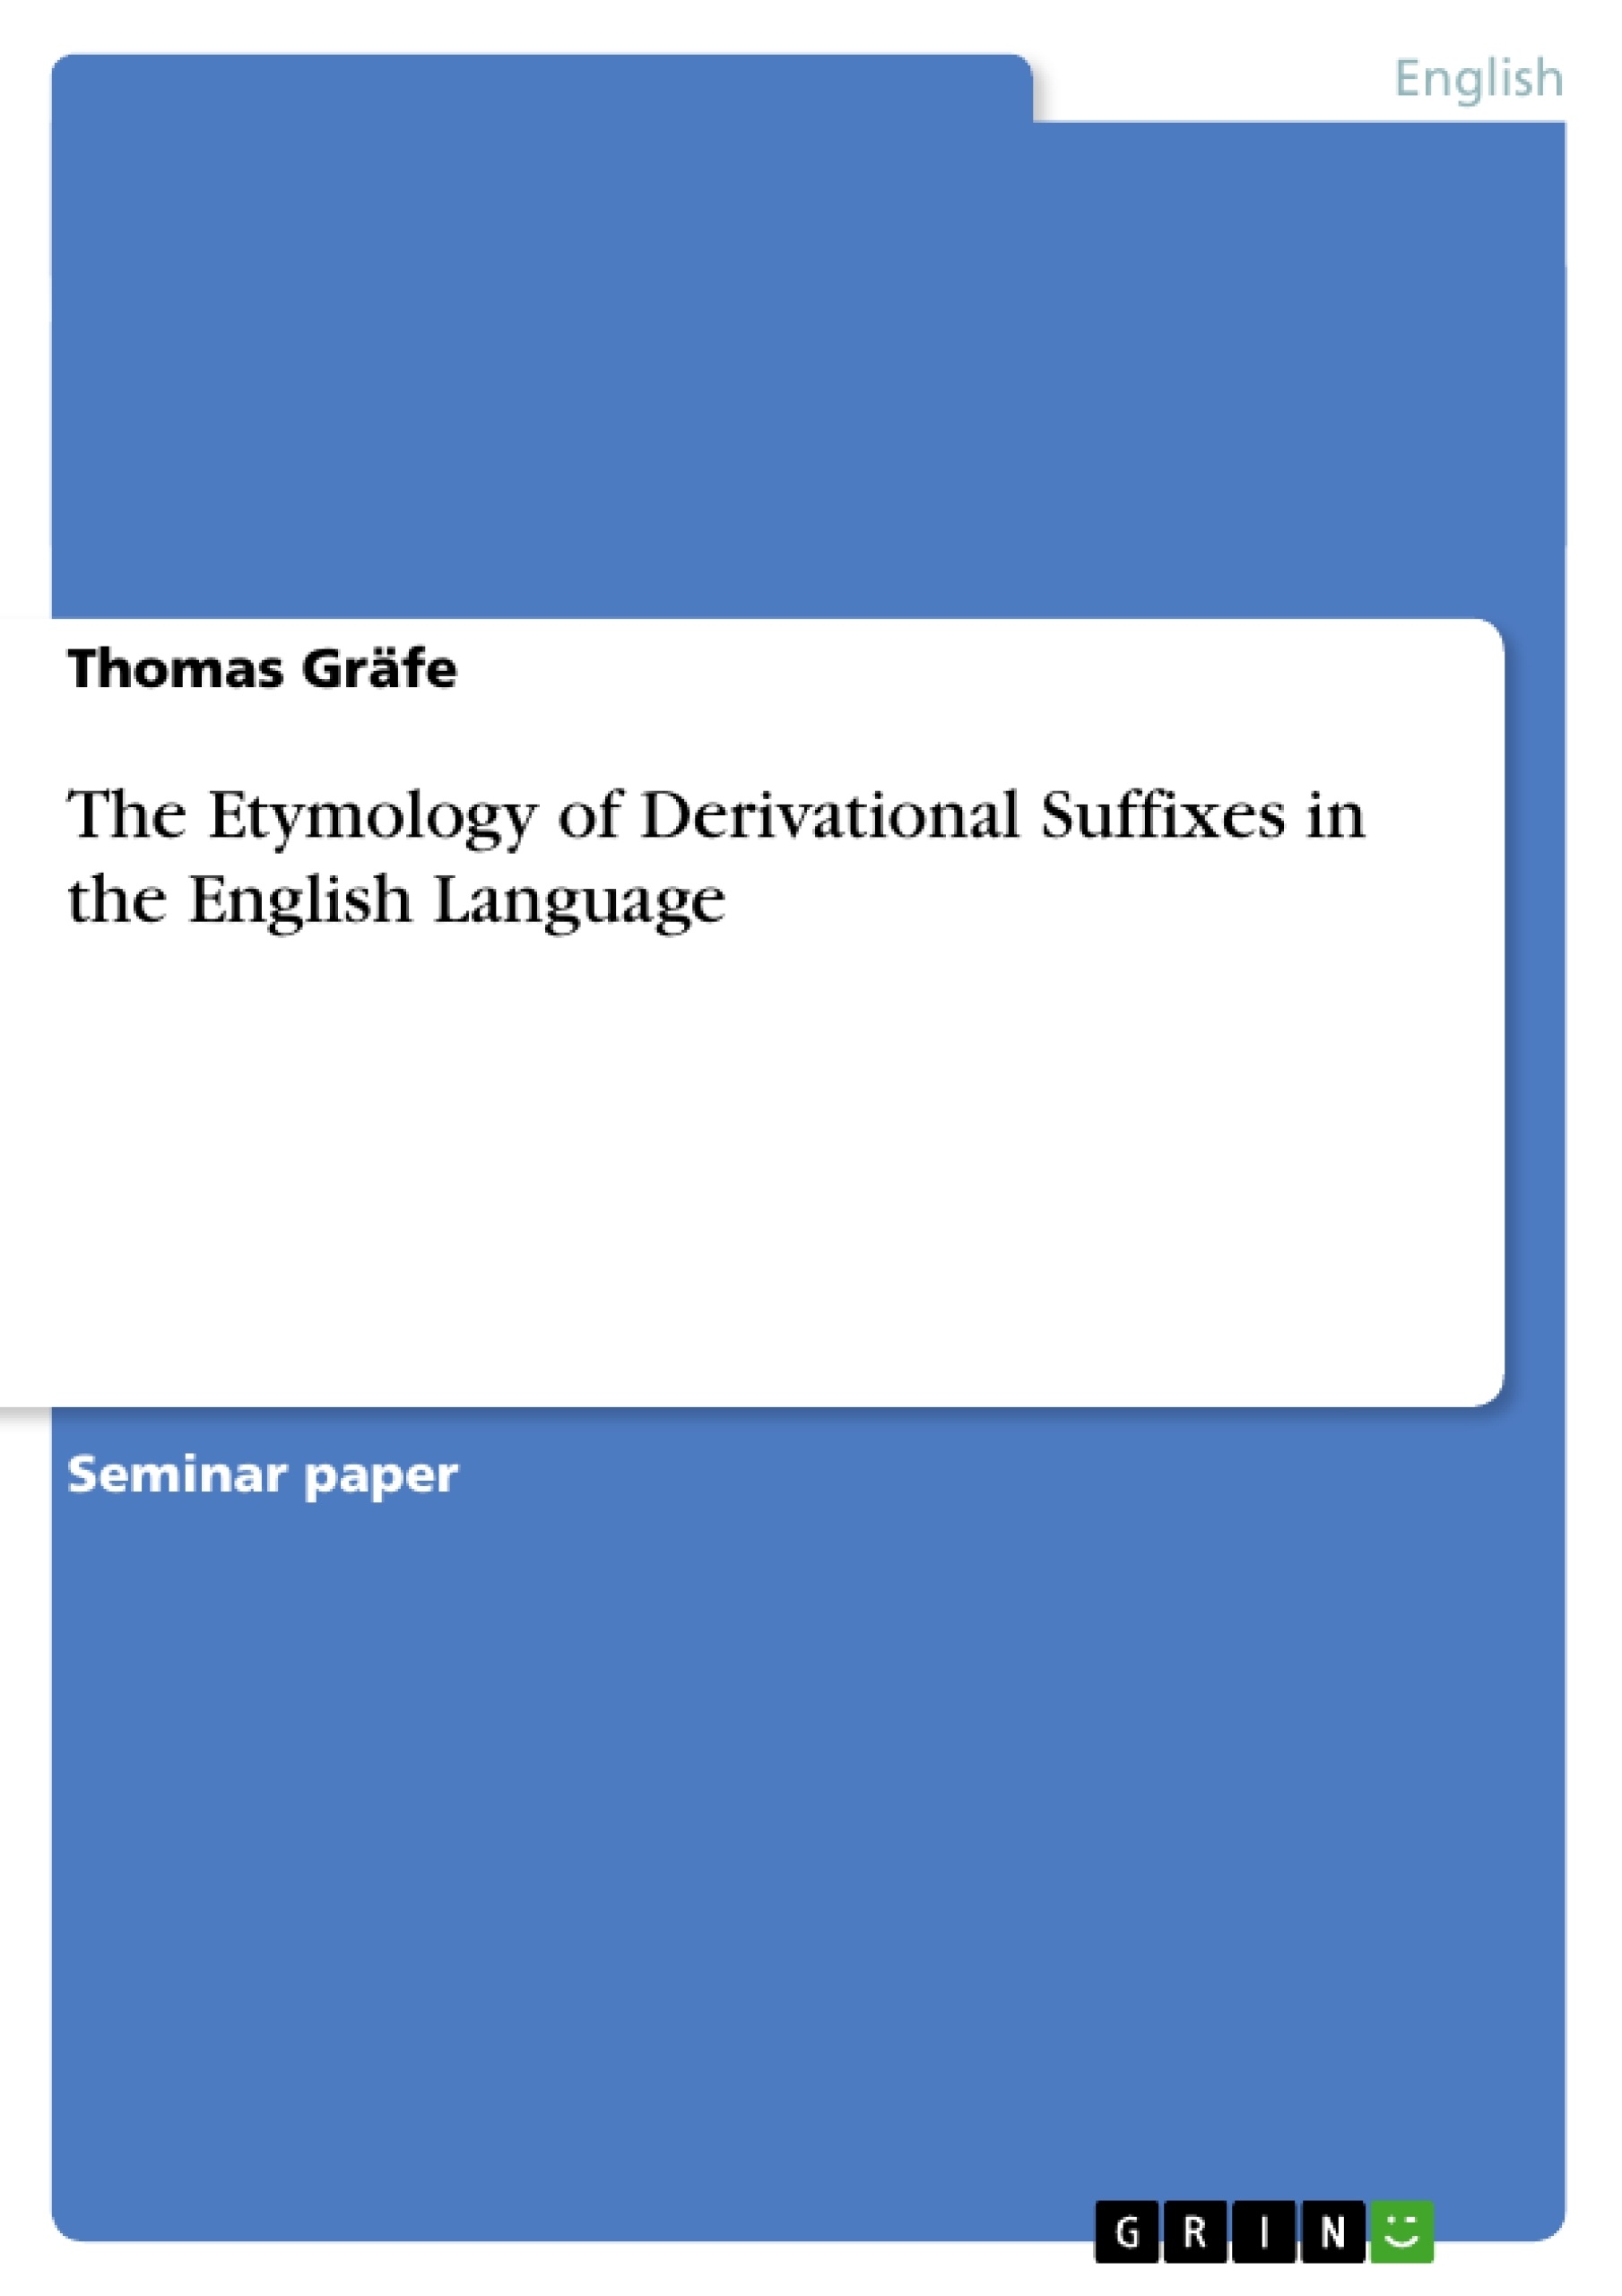 Título: The Etymology of Derivational Suffixes in the English Language